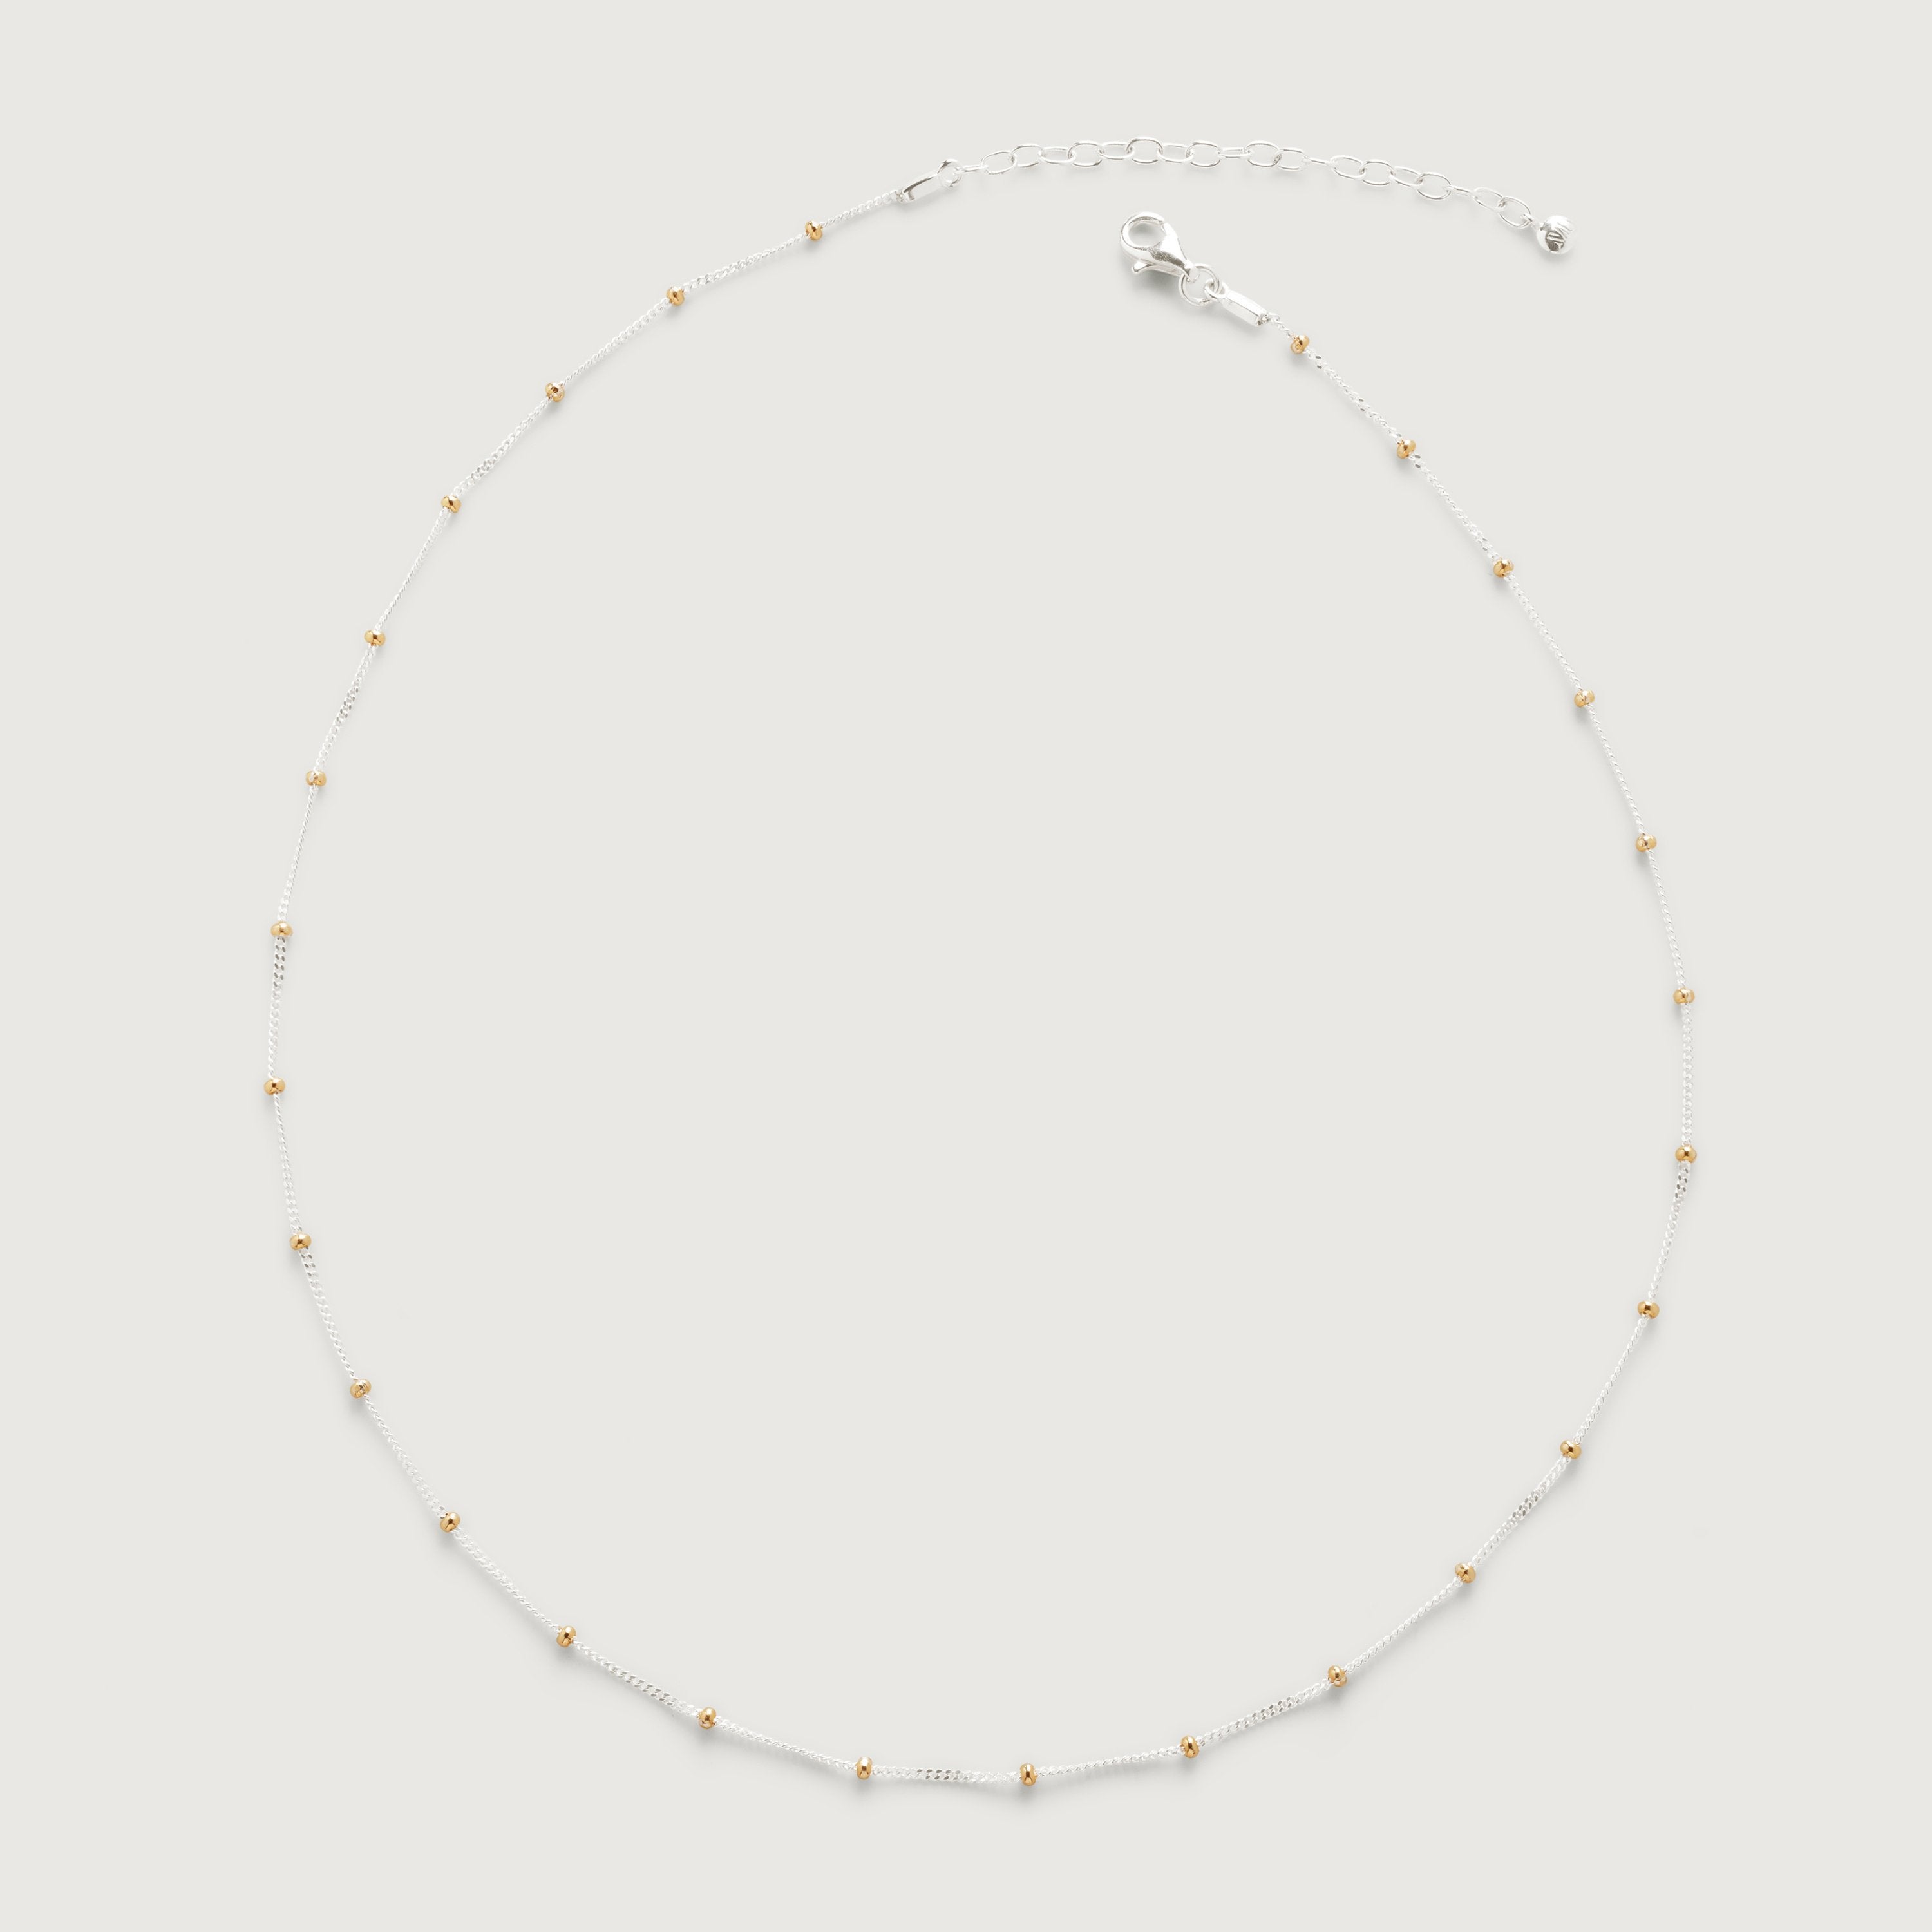 Monica Vinader stacking necklace options you can't resist - Vanity Owl